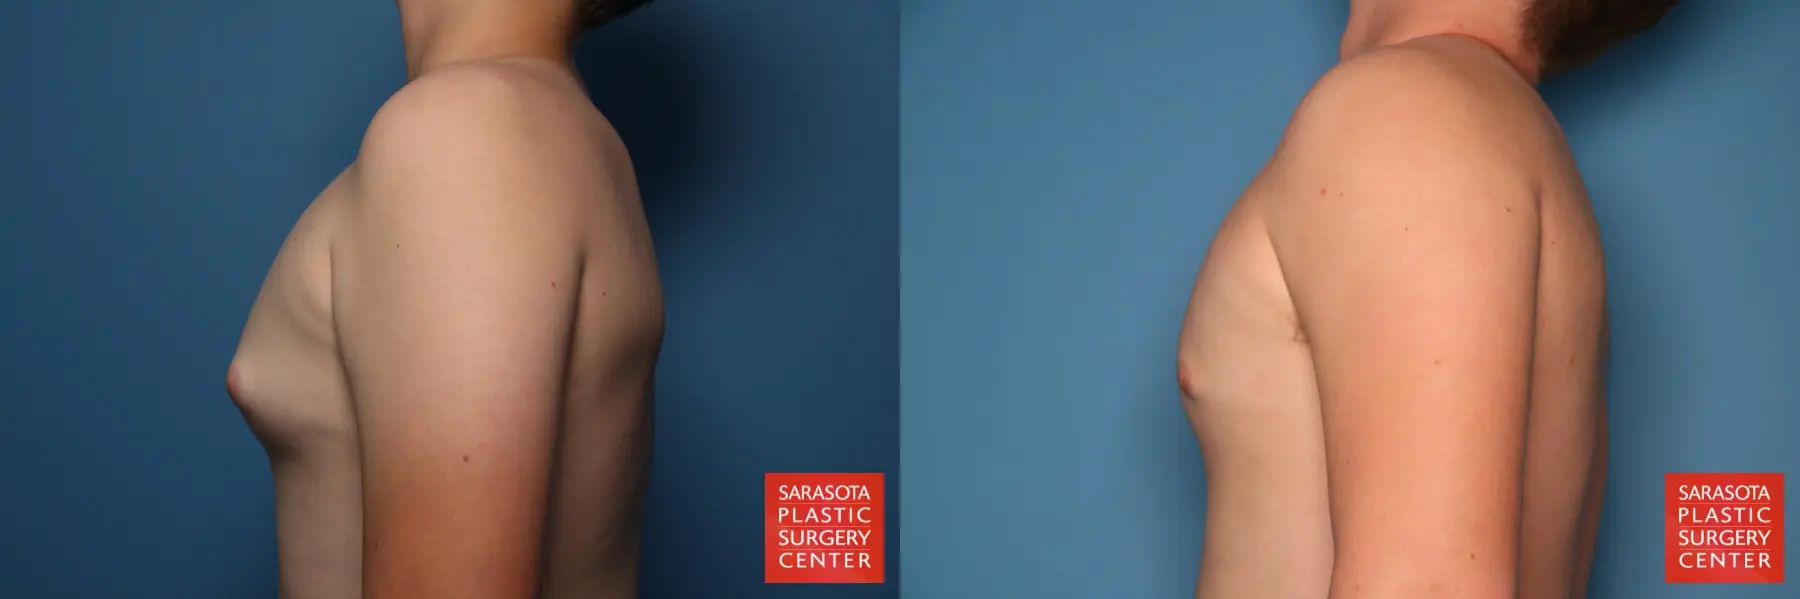 Gynecomastia: Patient 4 - Before and After 3